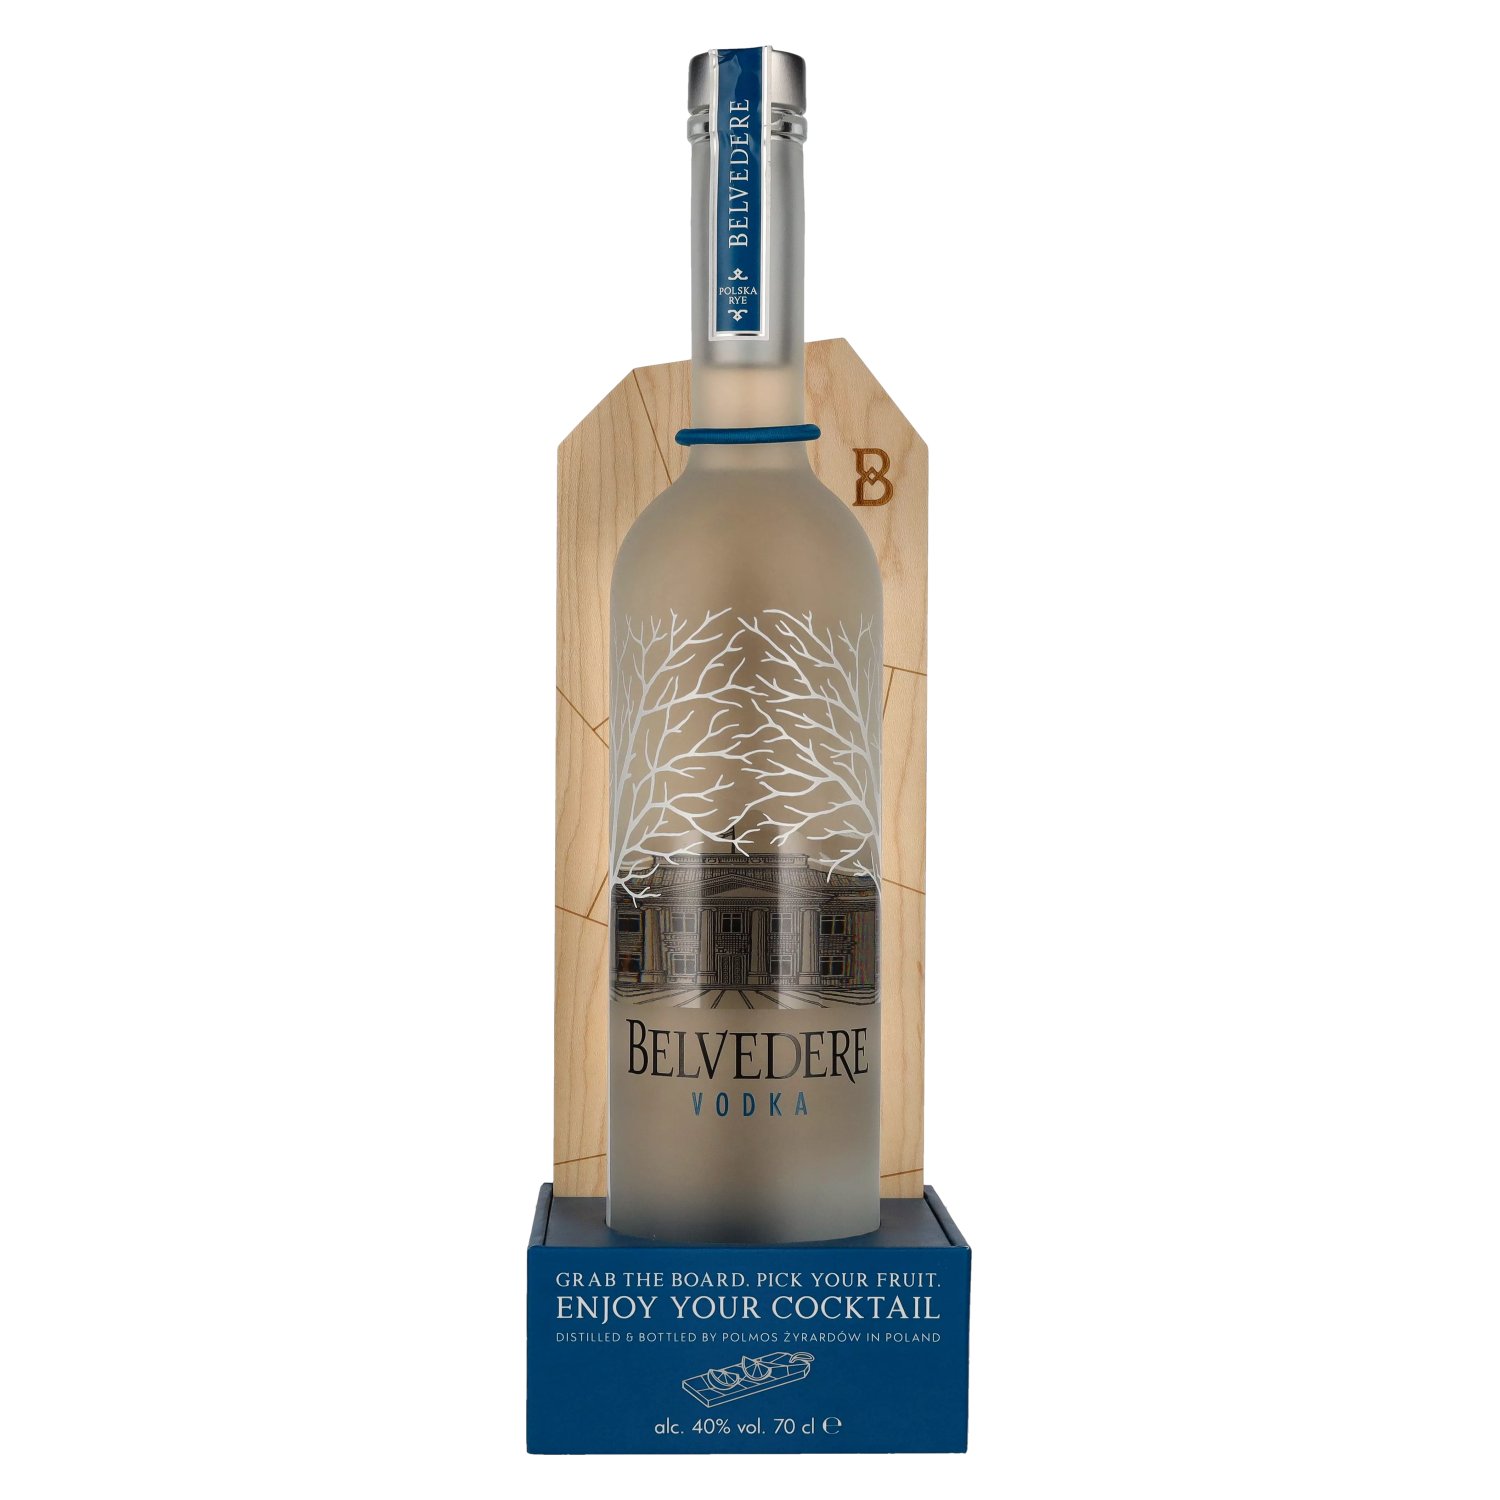 Belvedere 0,7l Vol. Holzbrett 40% with Vodka